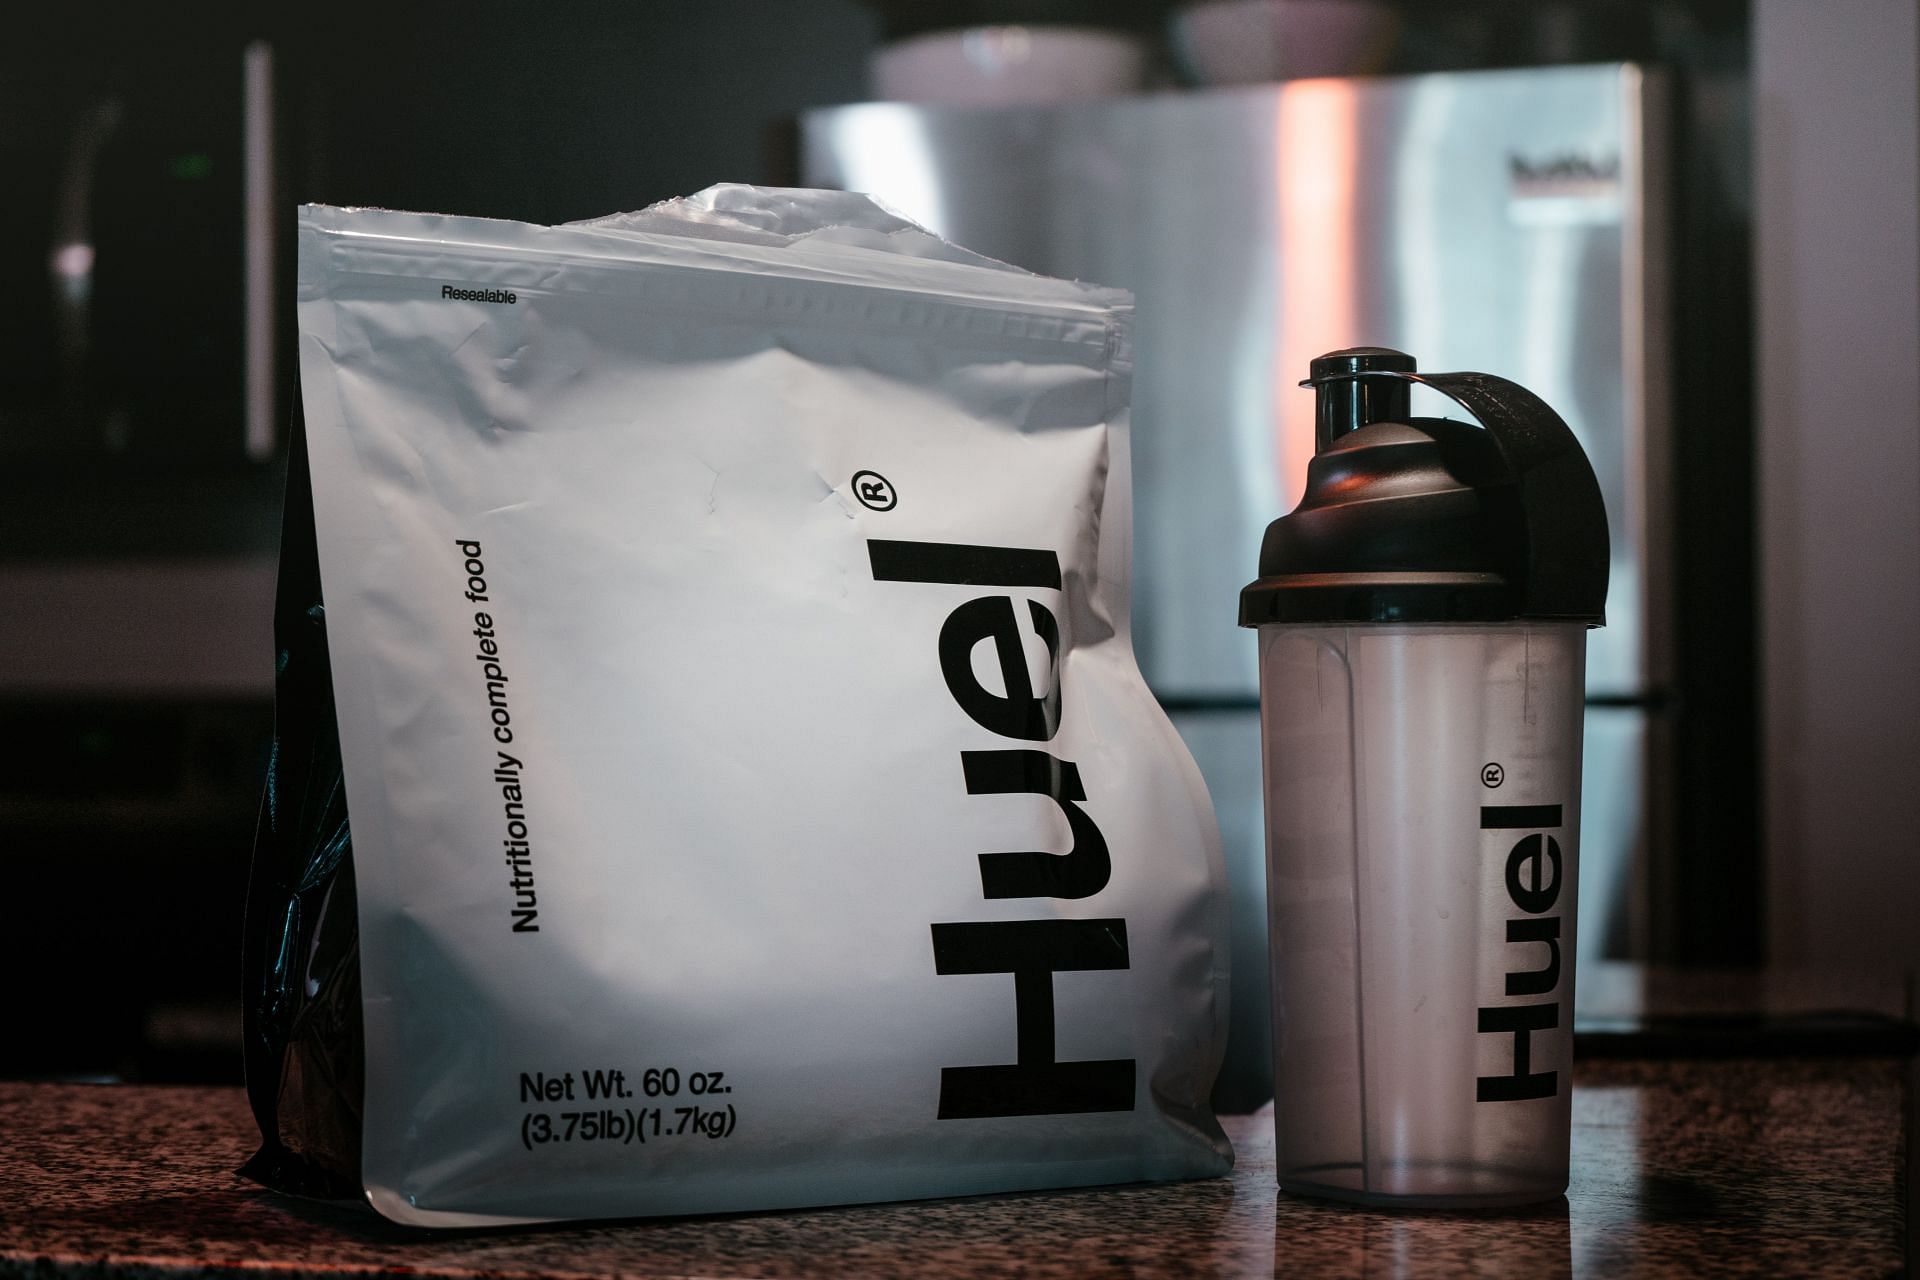 Why is Huel protein powder suddenly so popular?